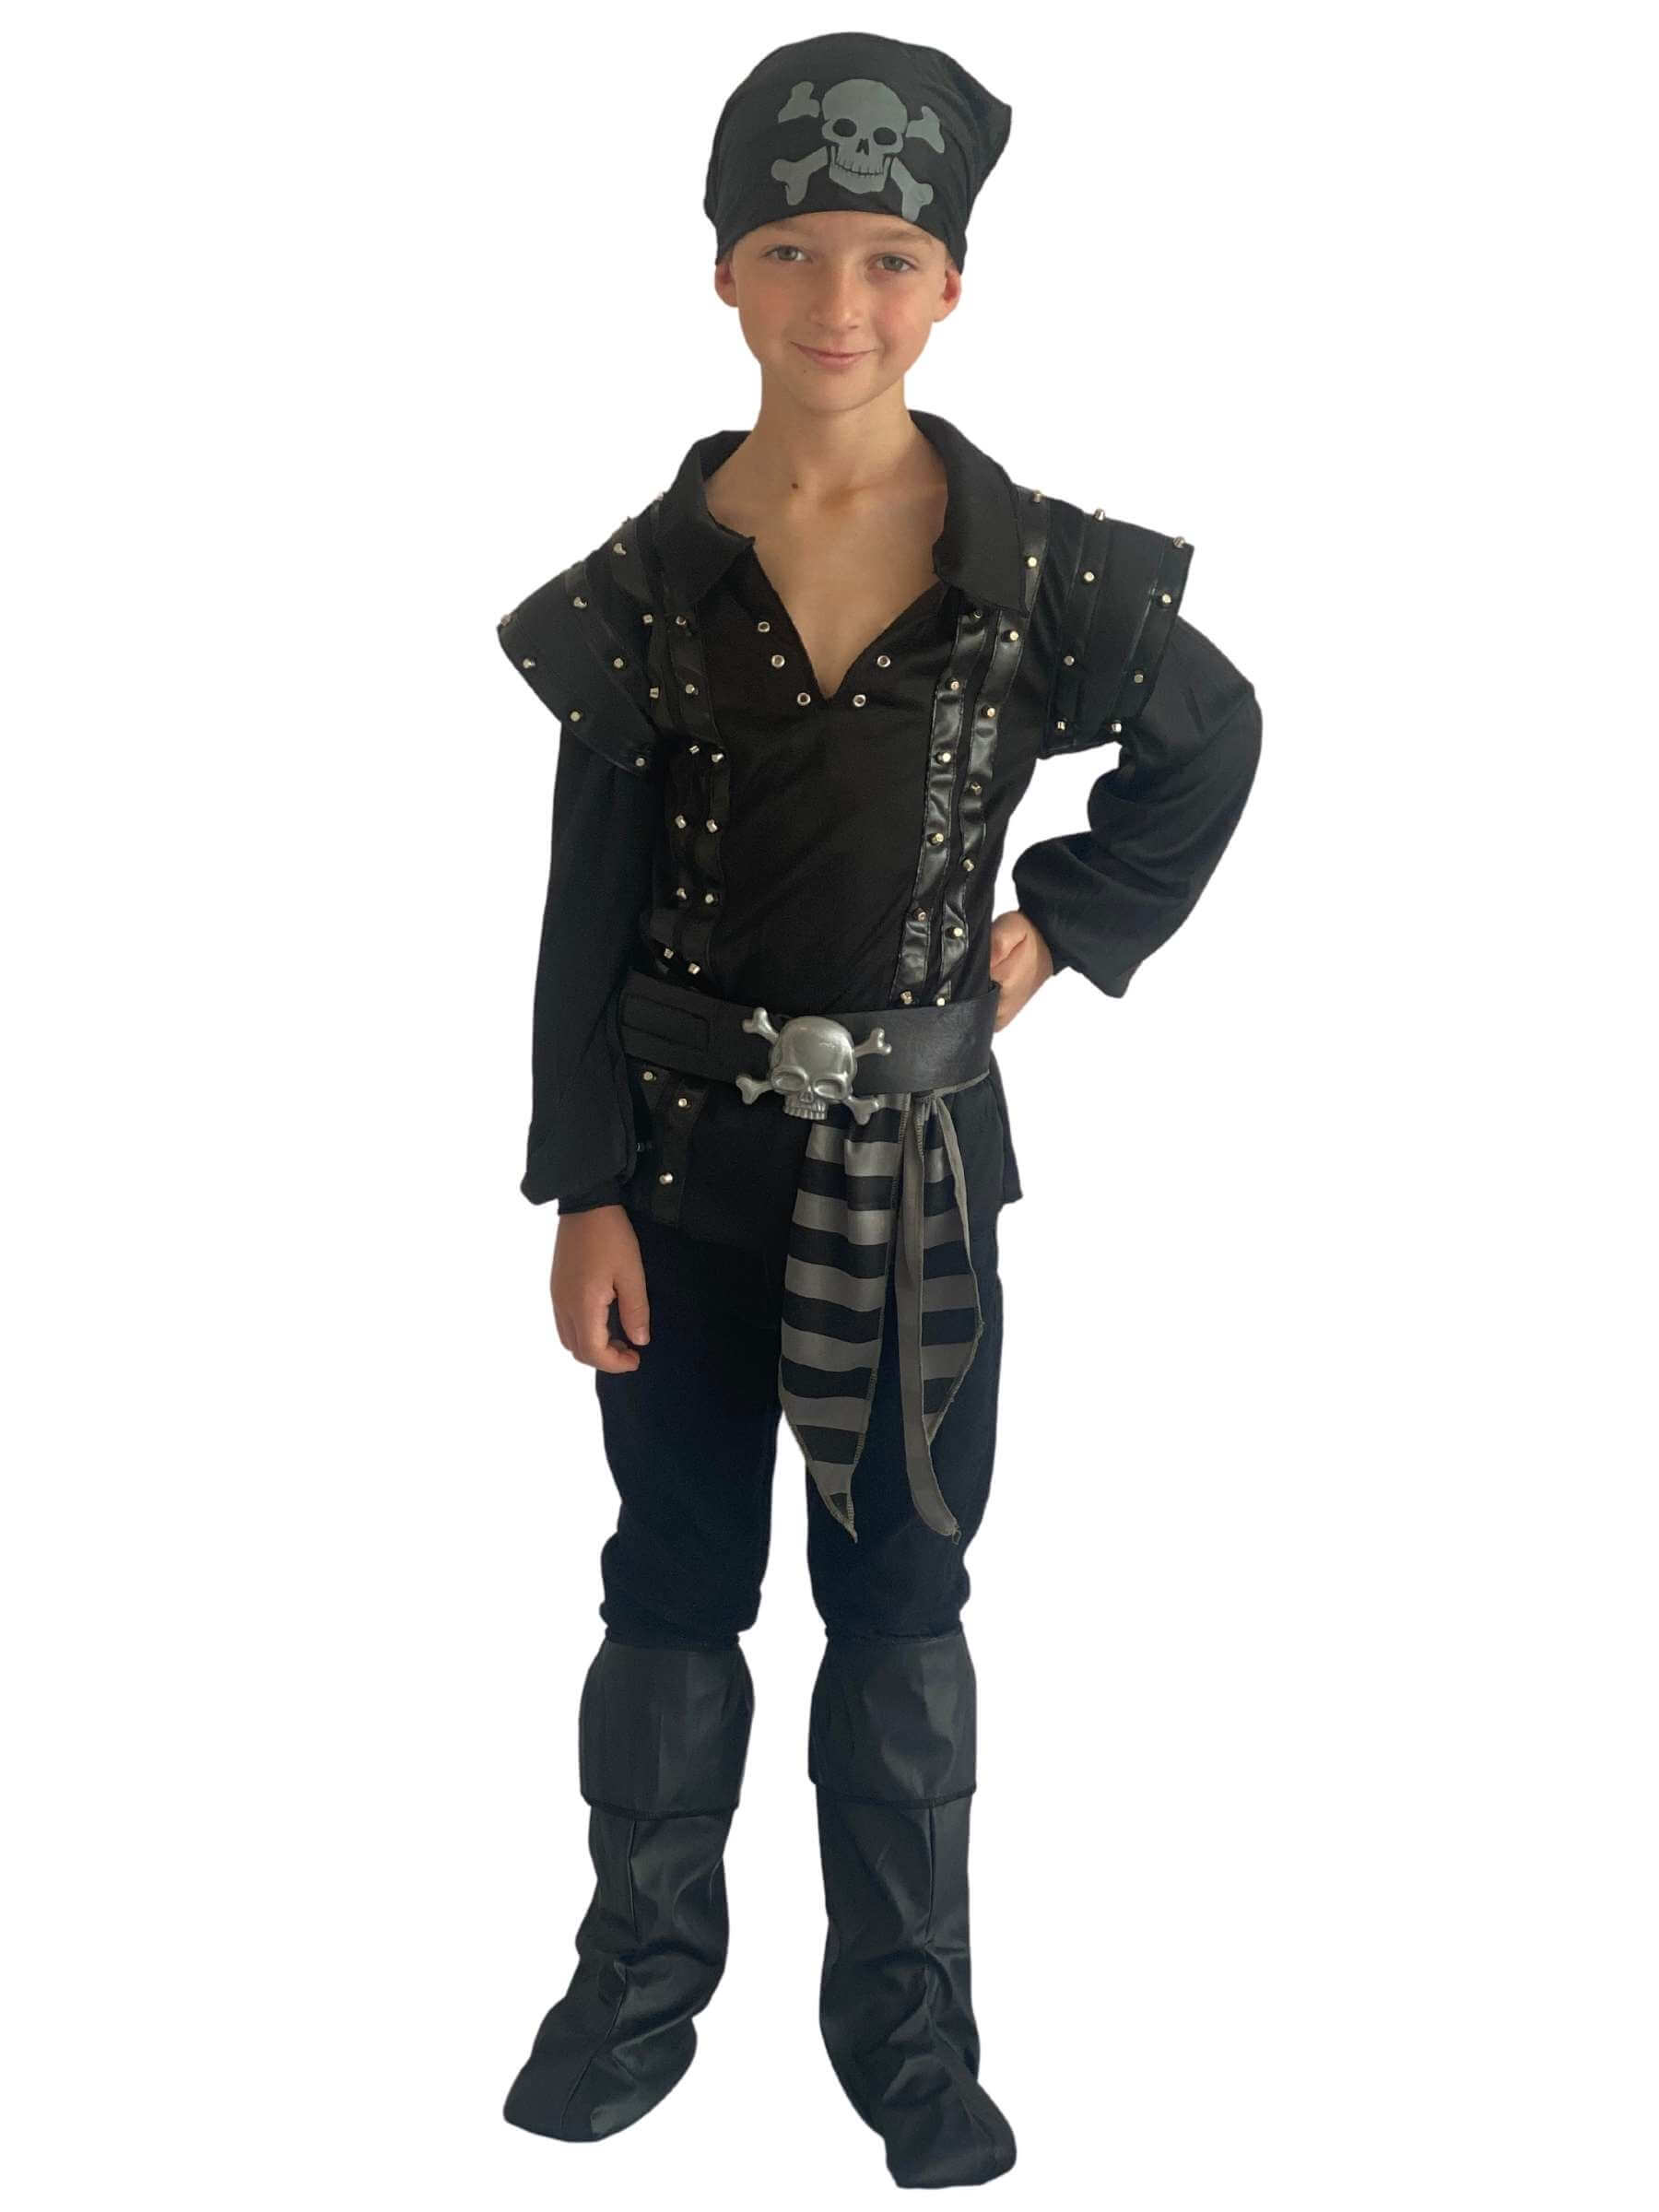 Boy in a black pirate costume with studs on the top, a skull belt and bandana.